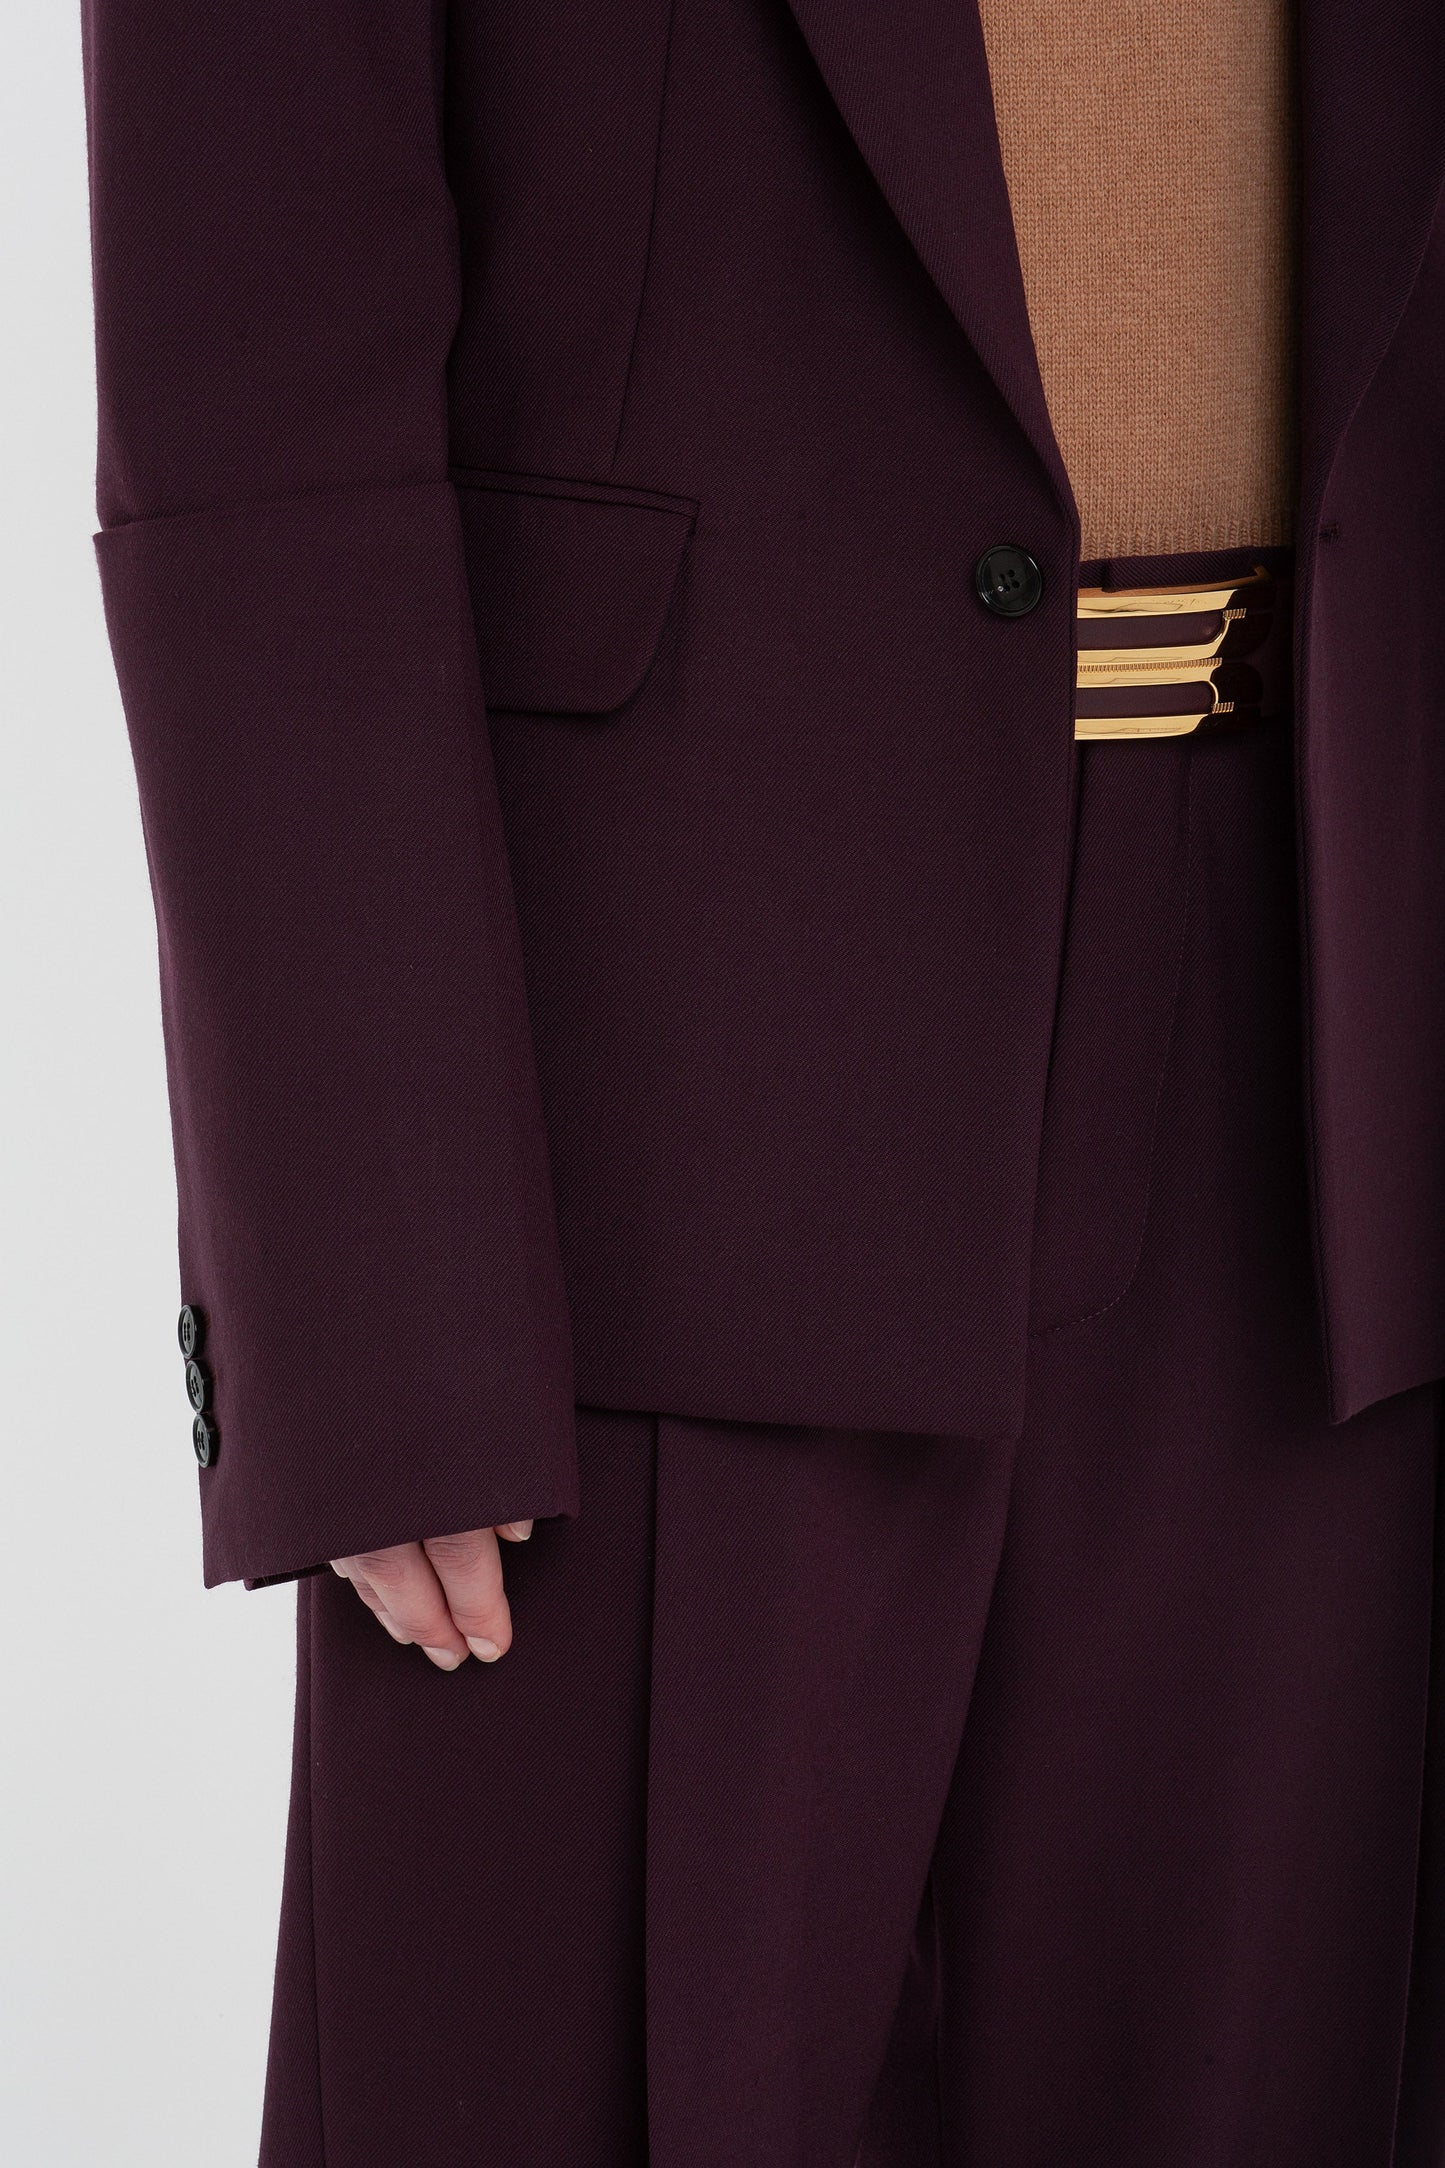 Close-up of a person wearing the Victoria Beckham Sleeve Detail Patch Pocket Jacket in Deep Mahogany with a brown sweater and matching pants, showcasing the black button detail on the sleeve and a striped belt.